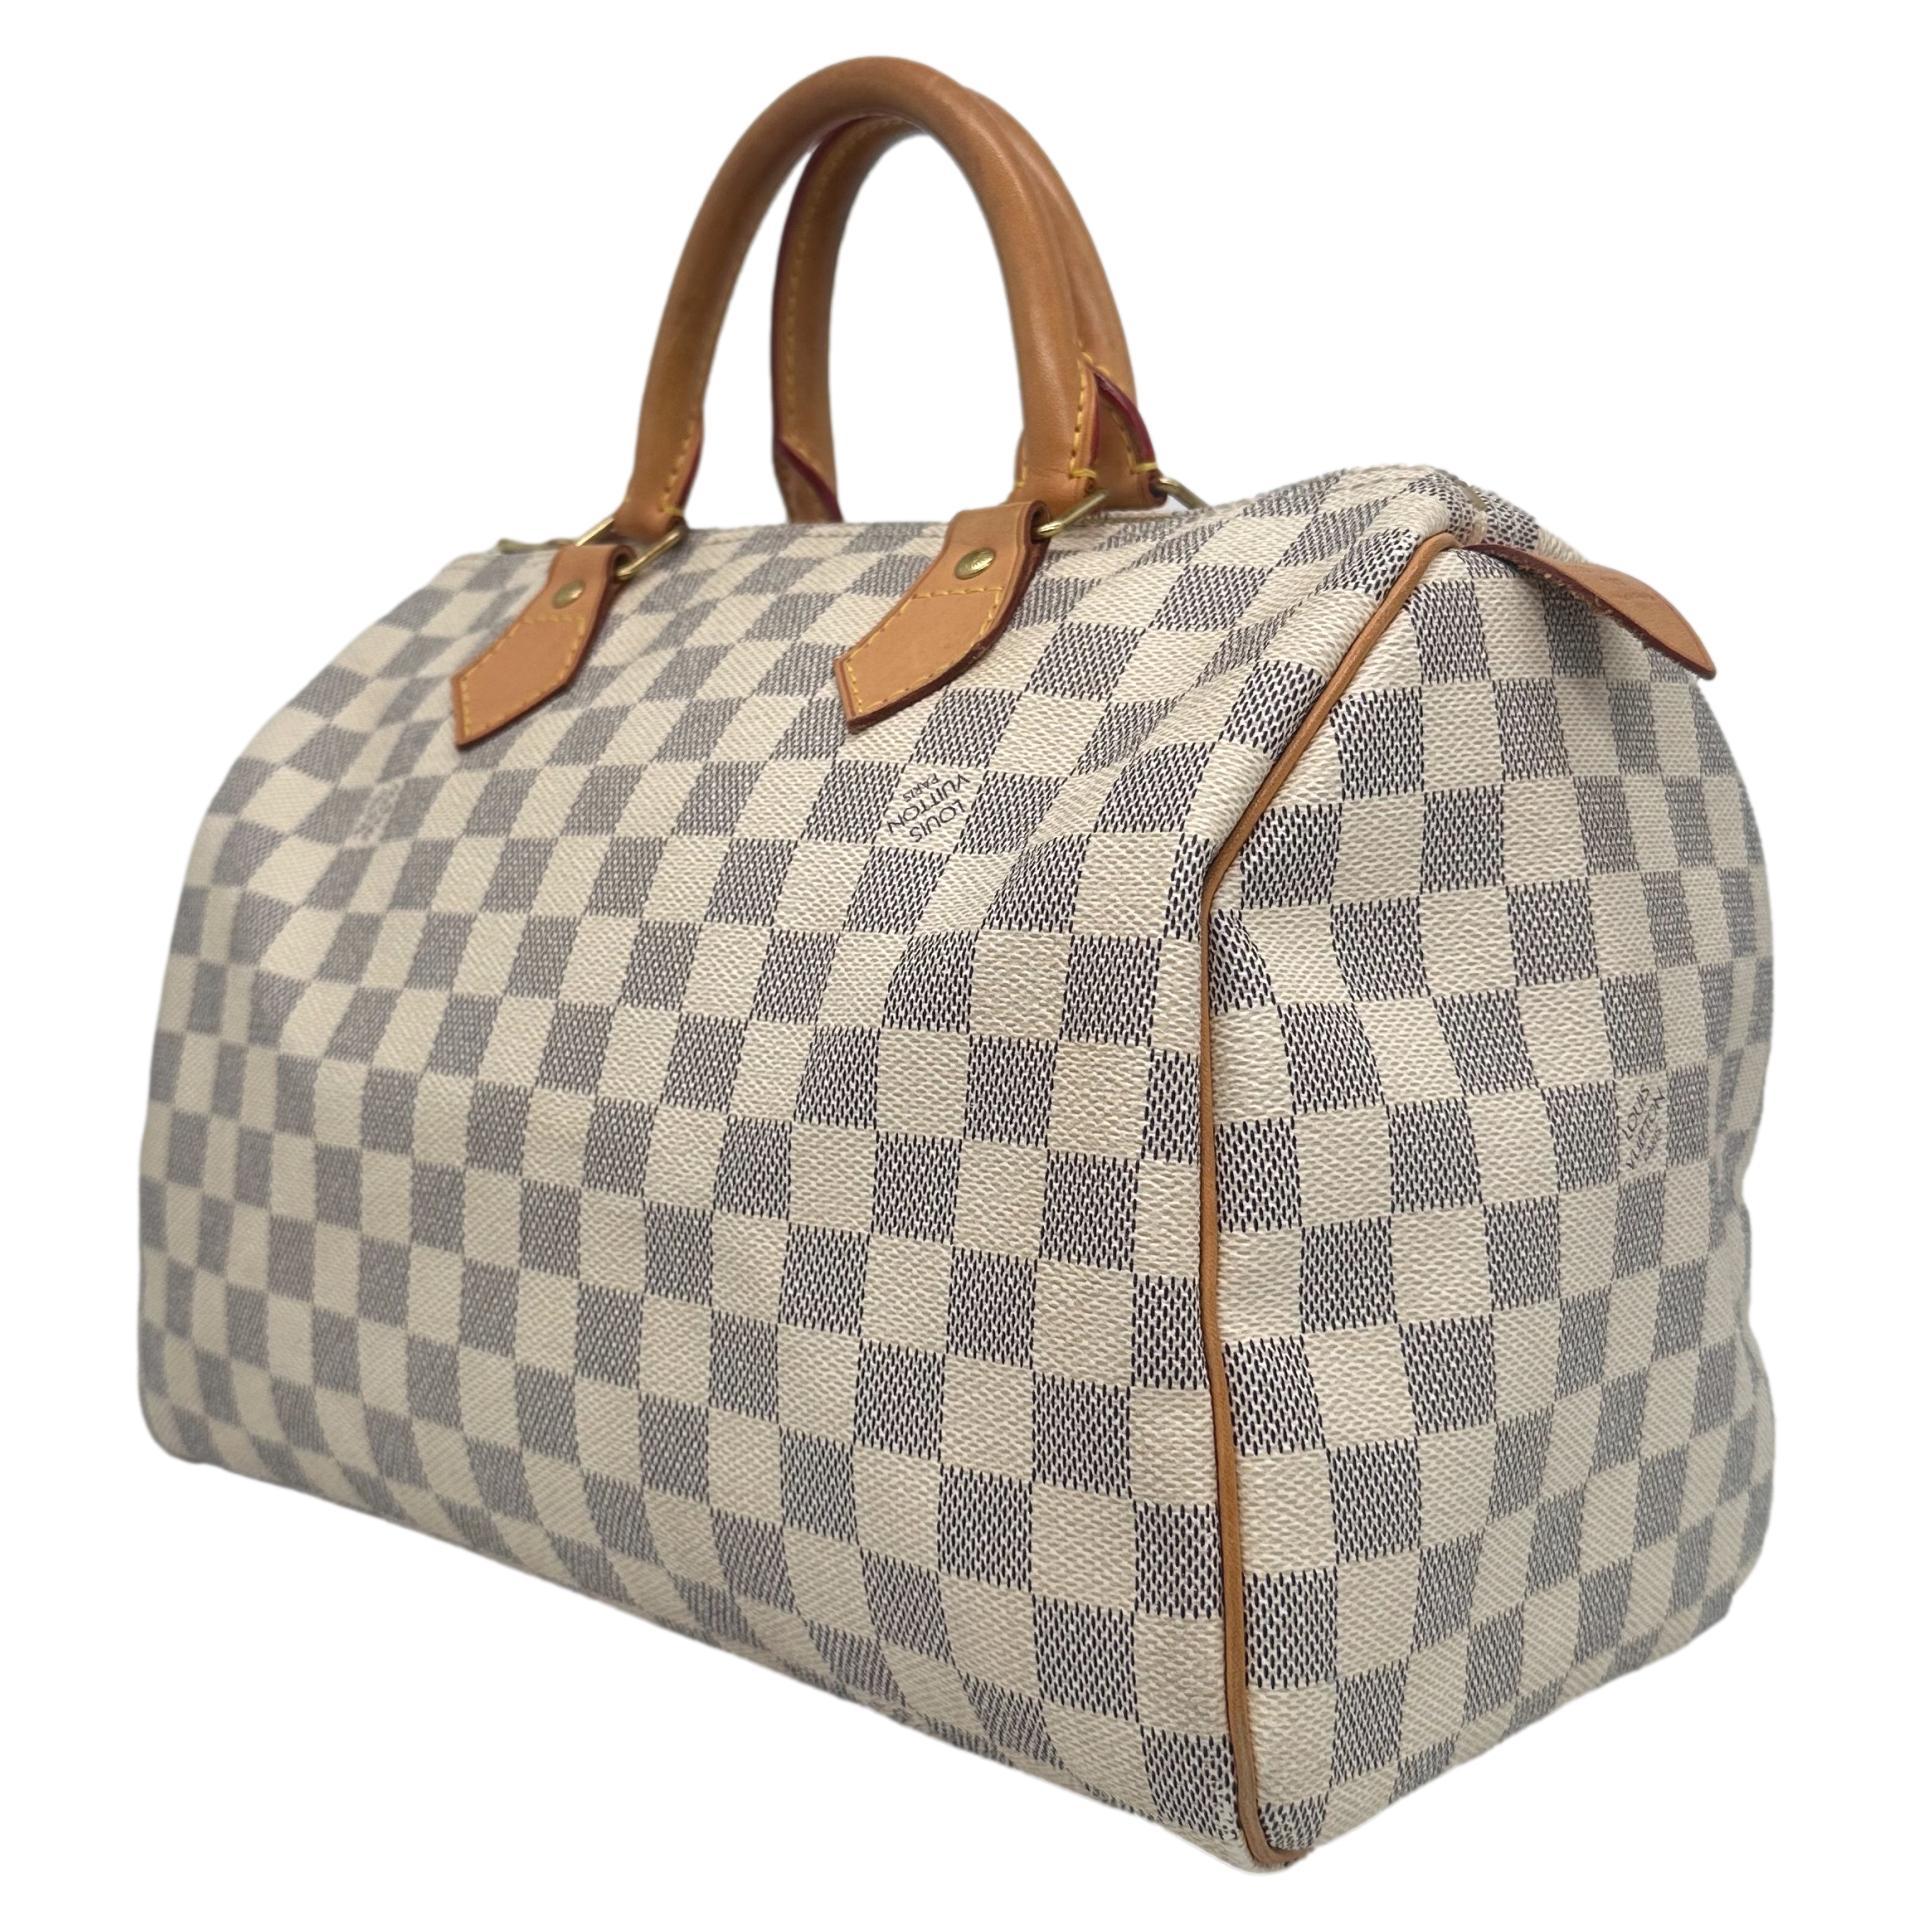 Louis Vuitton Damier Azur Speedy 30 Top Handle Bag, France 2010. This iconic speedy was first introduced in the 1930's and was designed as an alternative for the larger 